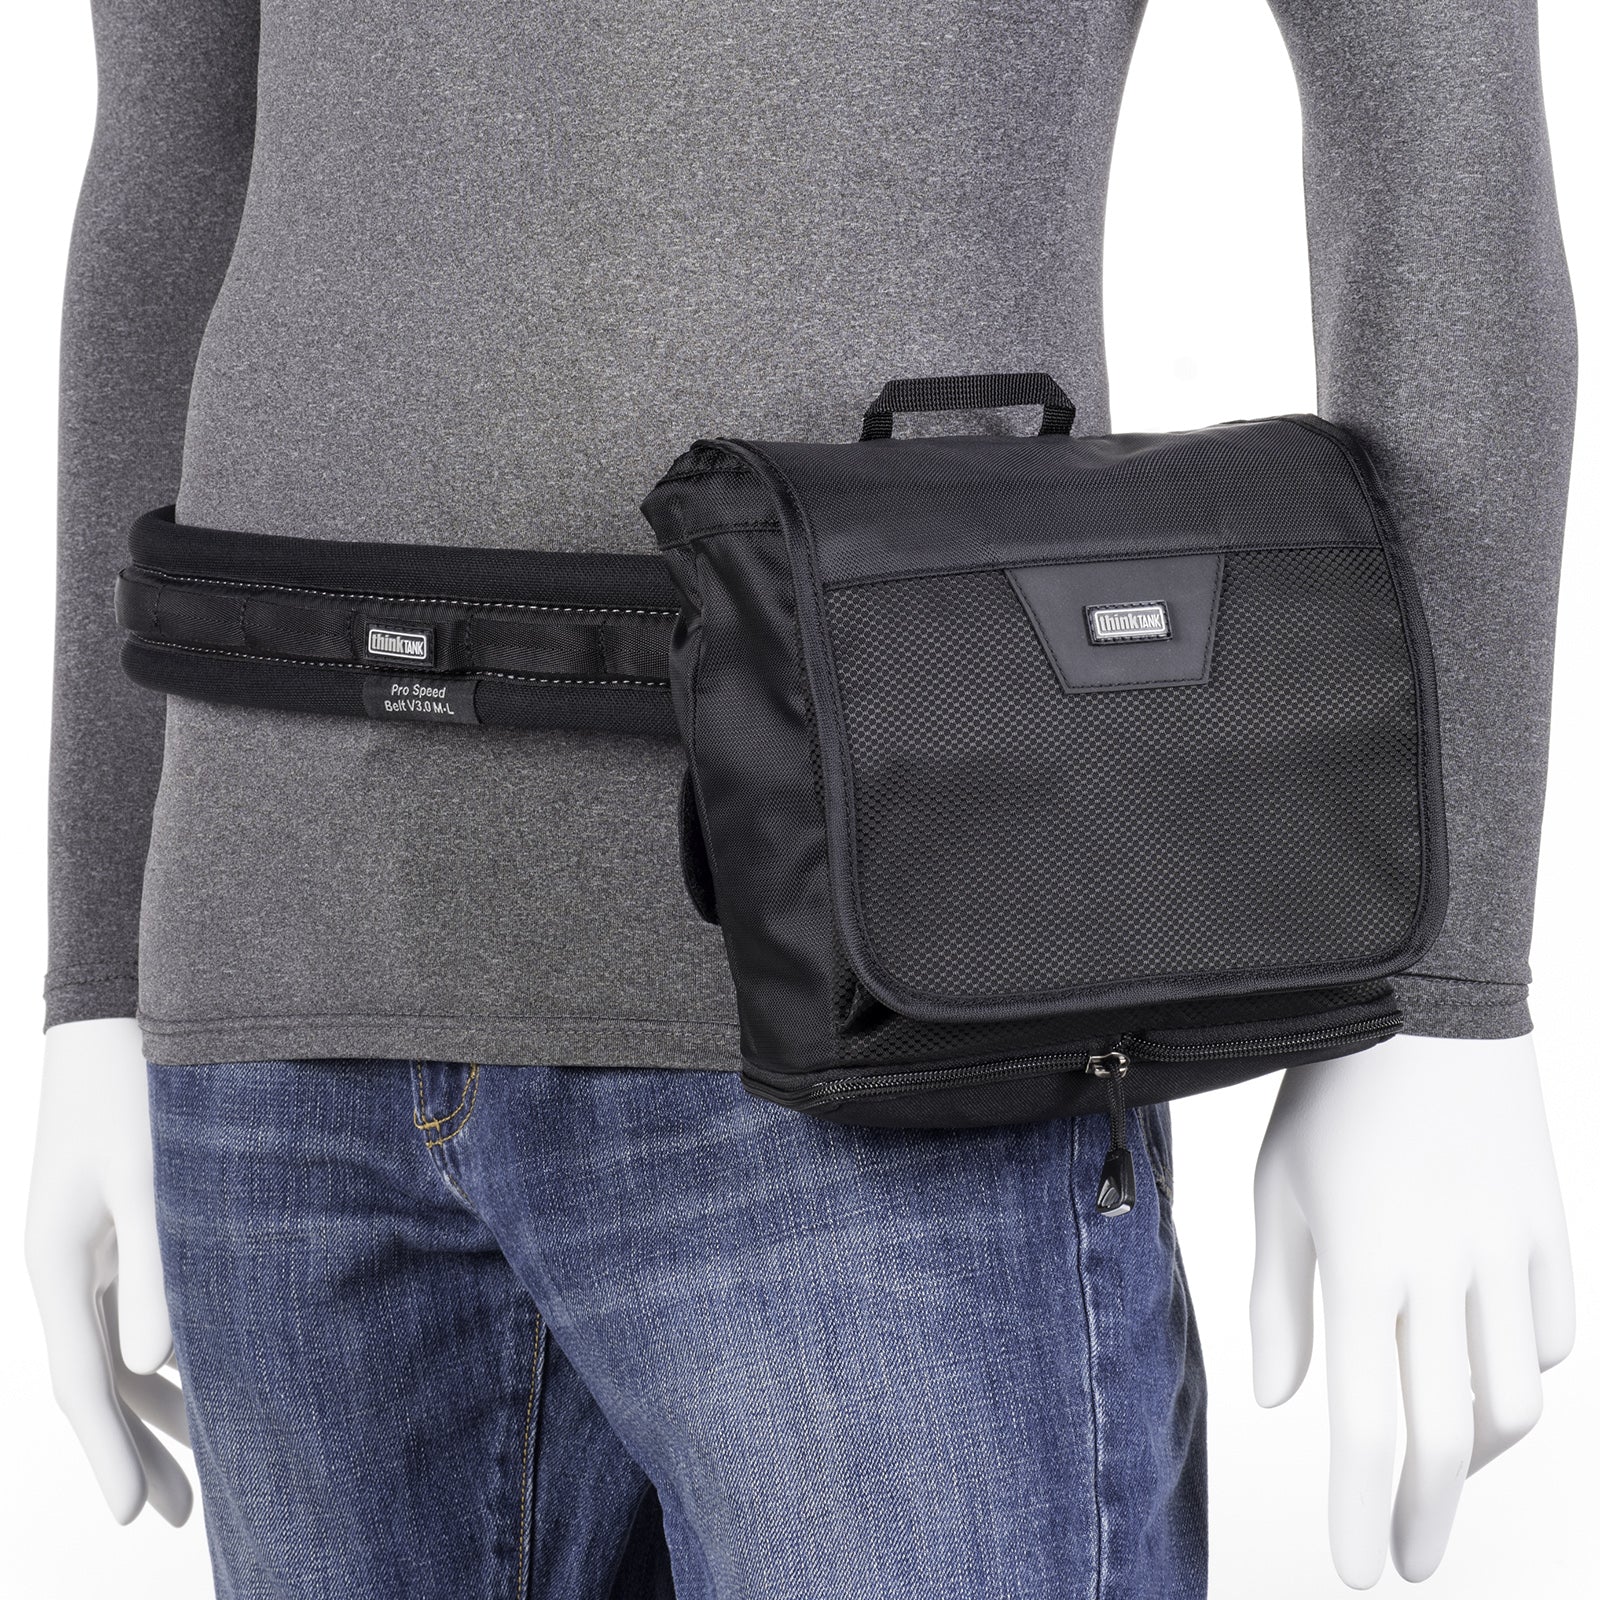 Attaches to any Think Tank belt or beltpack (sold separately)